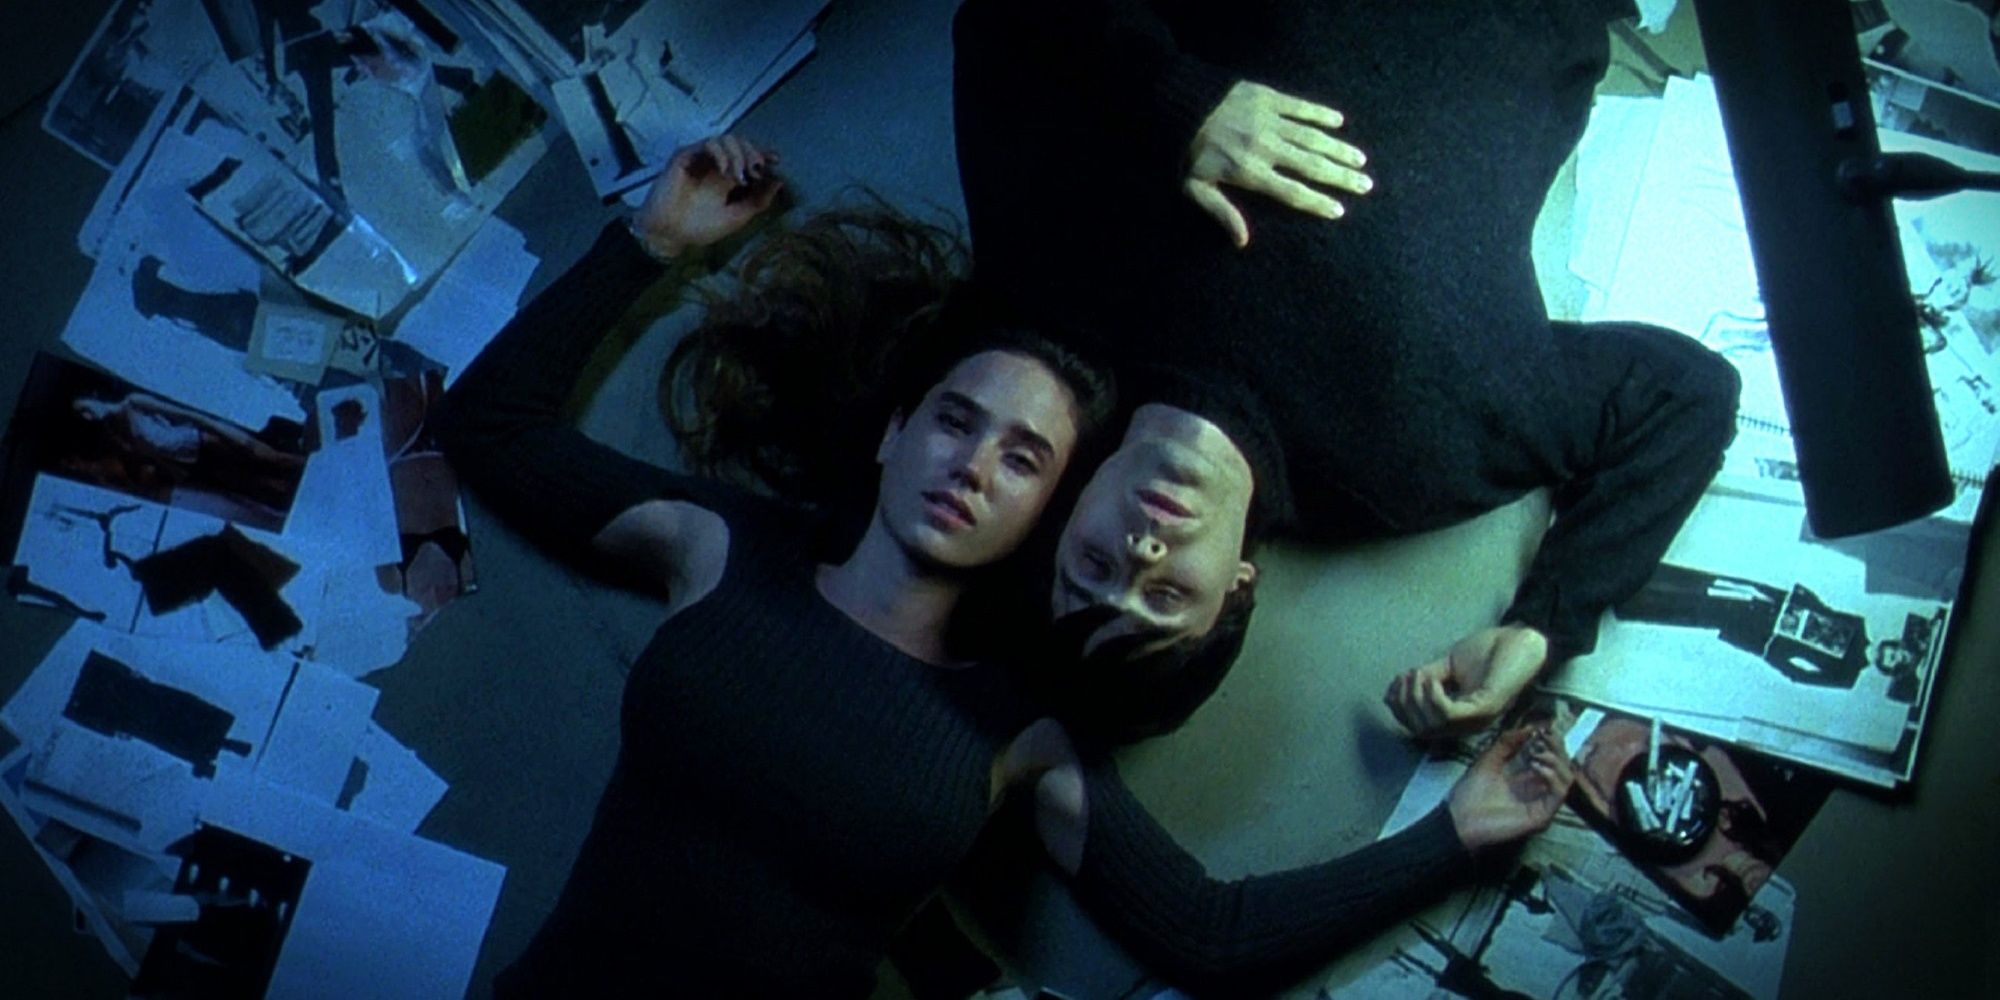 Harry and Marion laying on the floor in Requiem for a Dream.